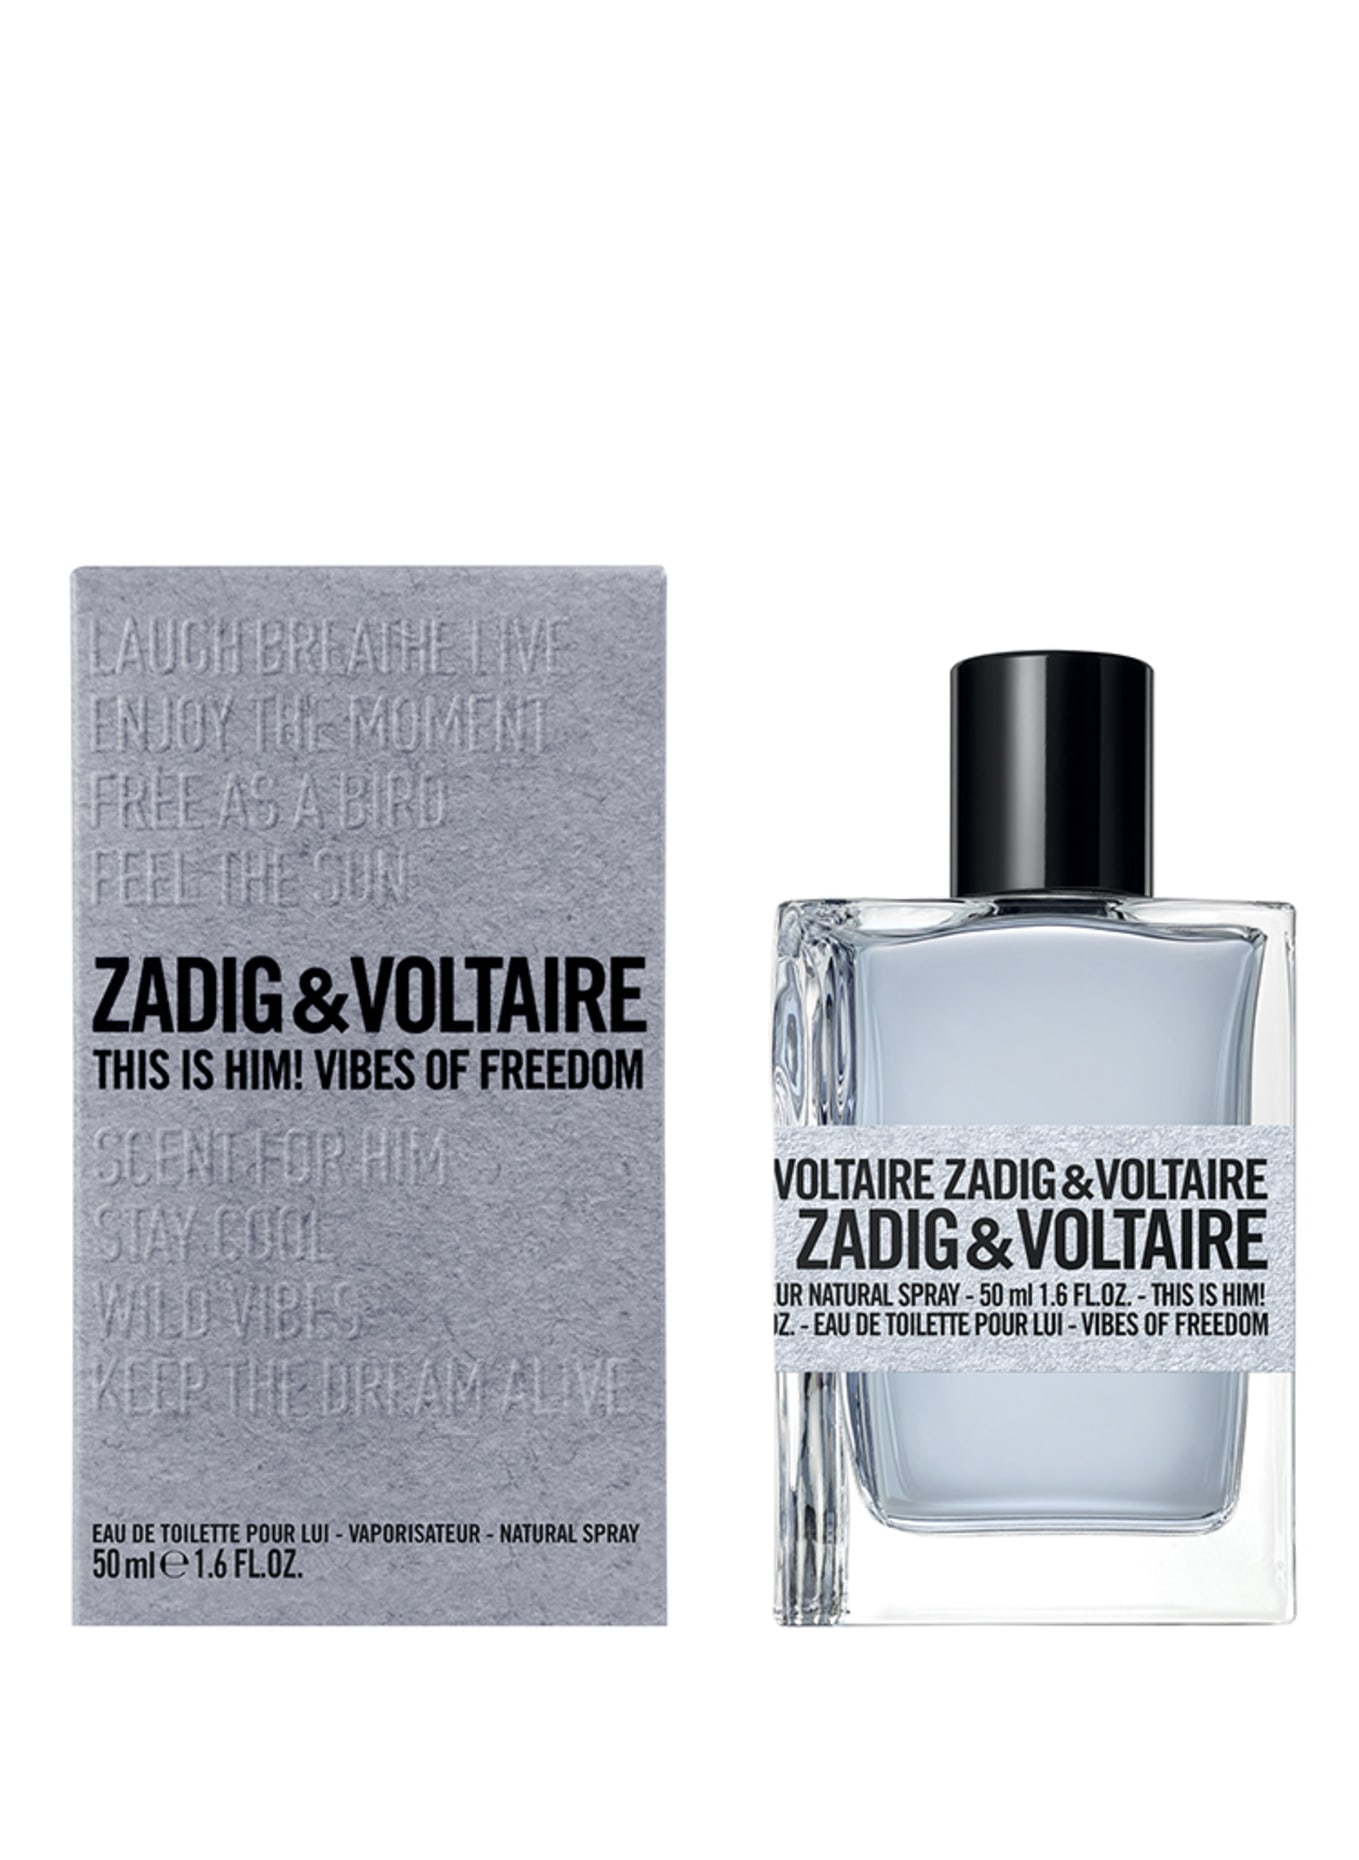 ZADIG & VOLTAIRE Fragrances THIS IS HIM! VIBES OF FREEDOM (Obrazek 2)